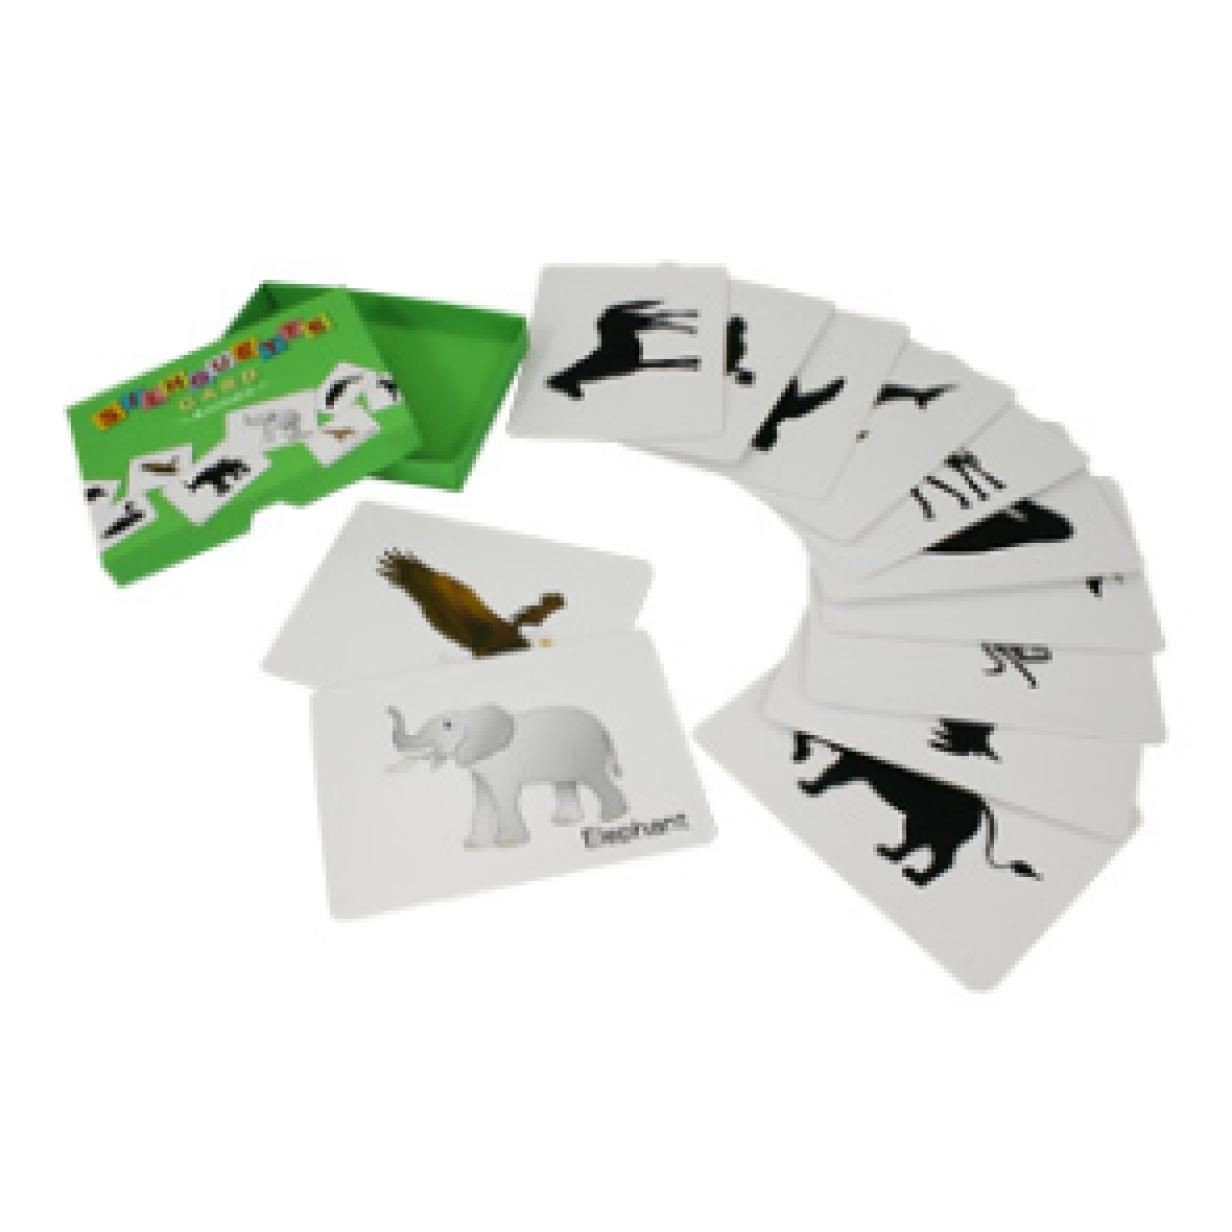 Game Papercraft Silhouette Card Animals toys Paper Craft Educational Game